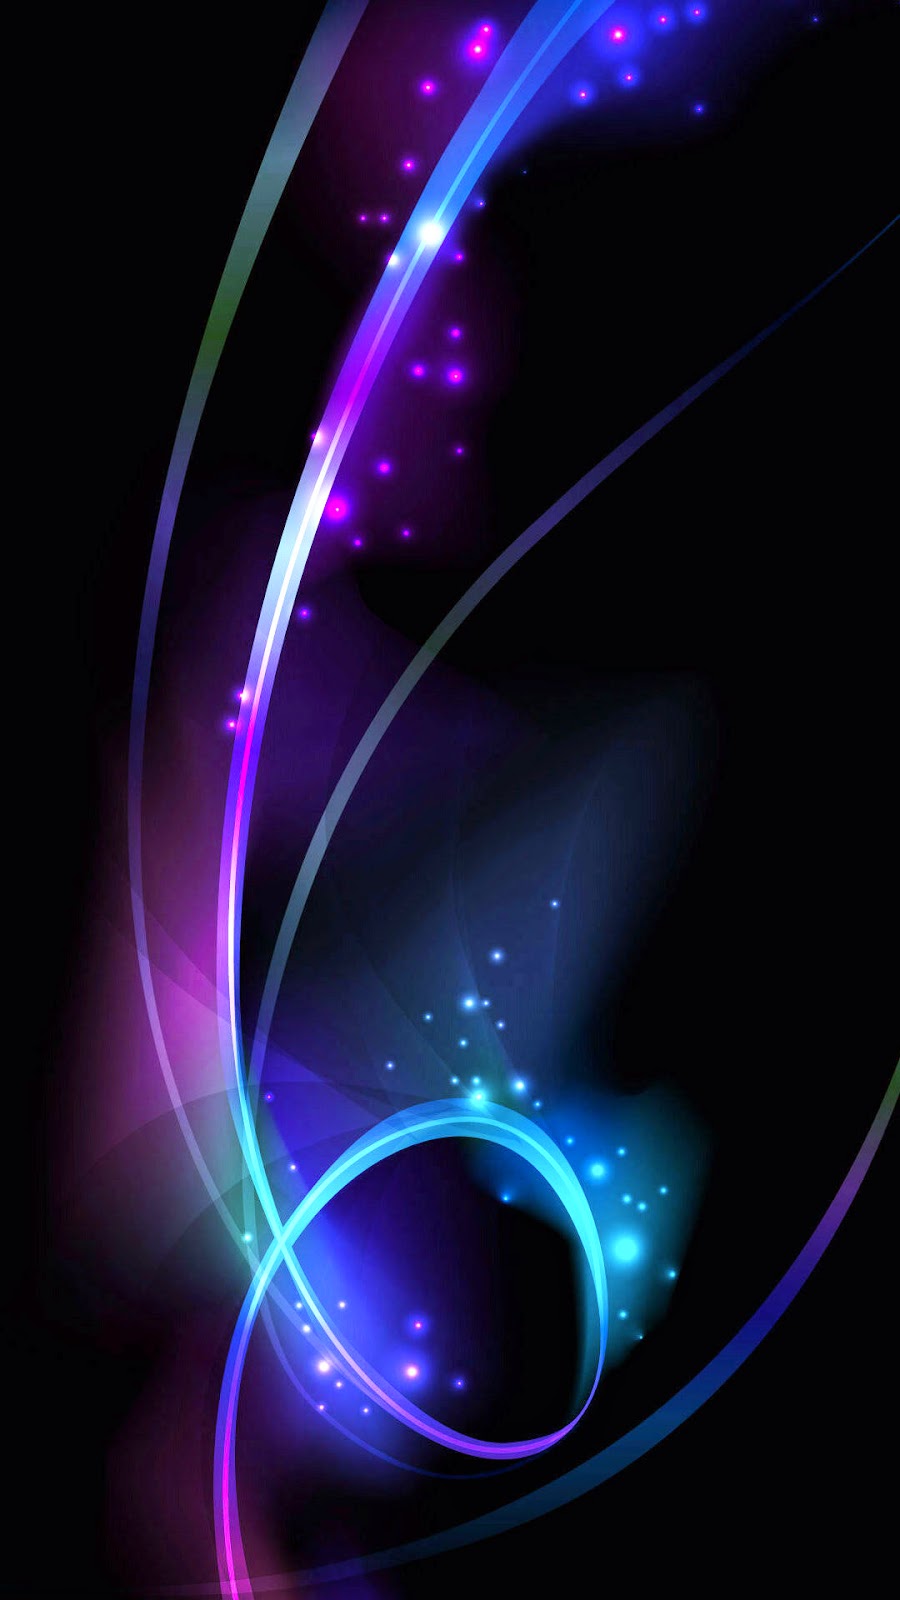 Be Linspired iPhone 6 Wallpaper Backgrounds 900x1600